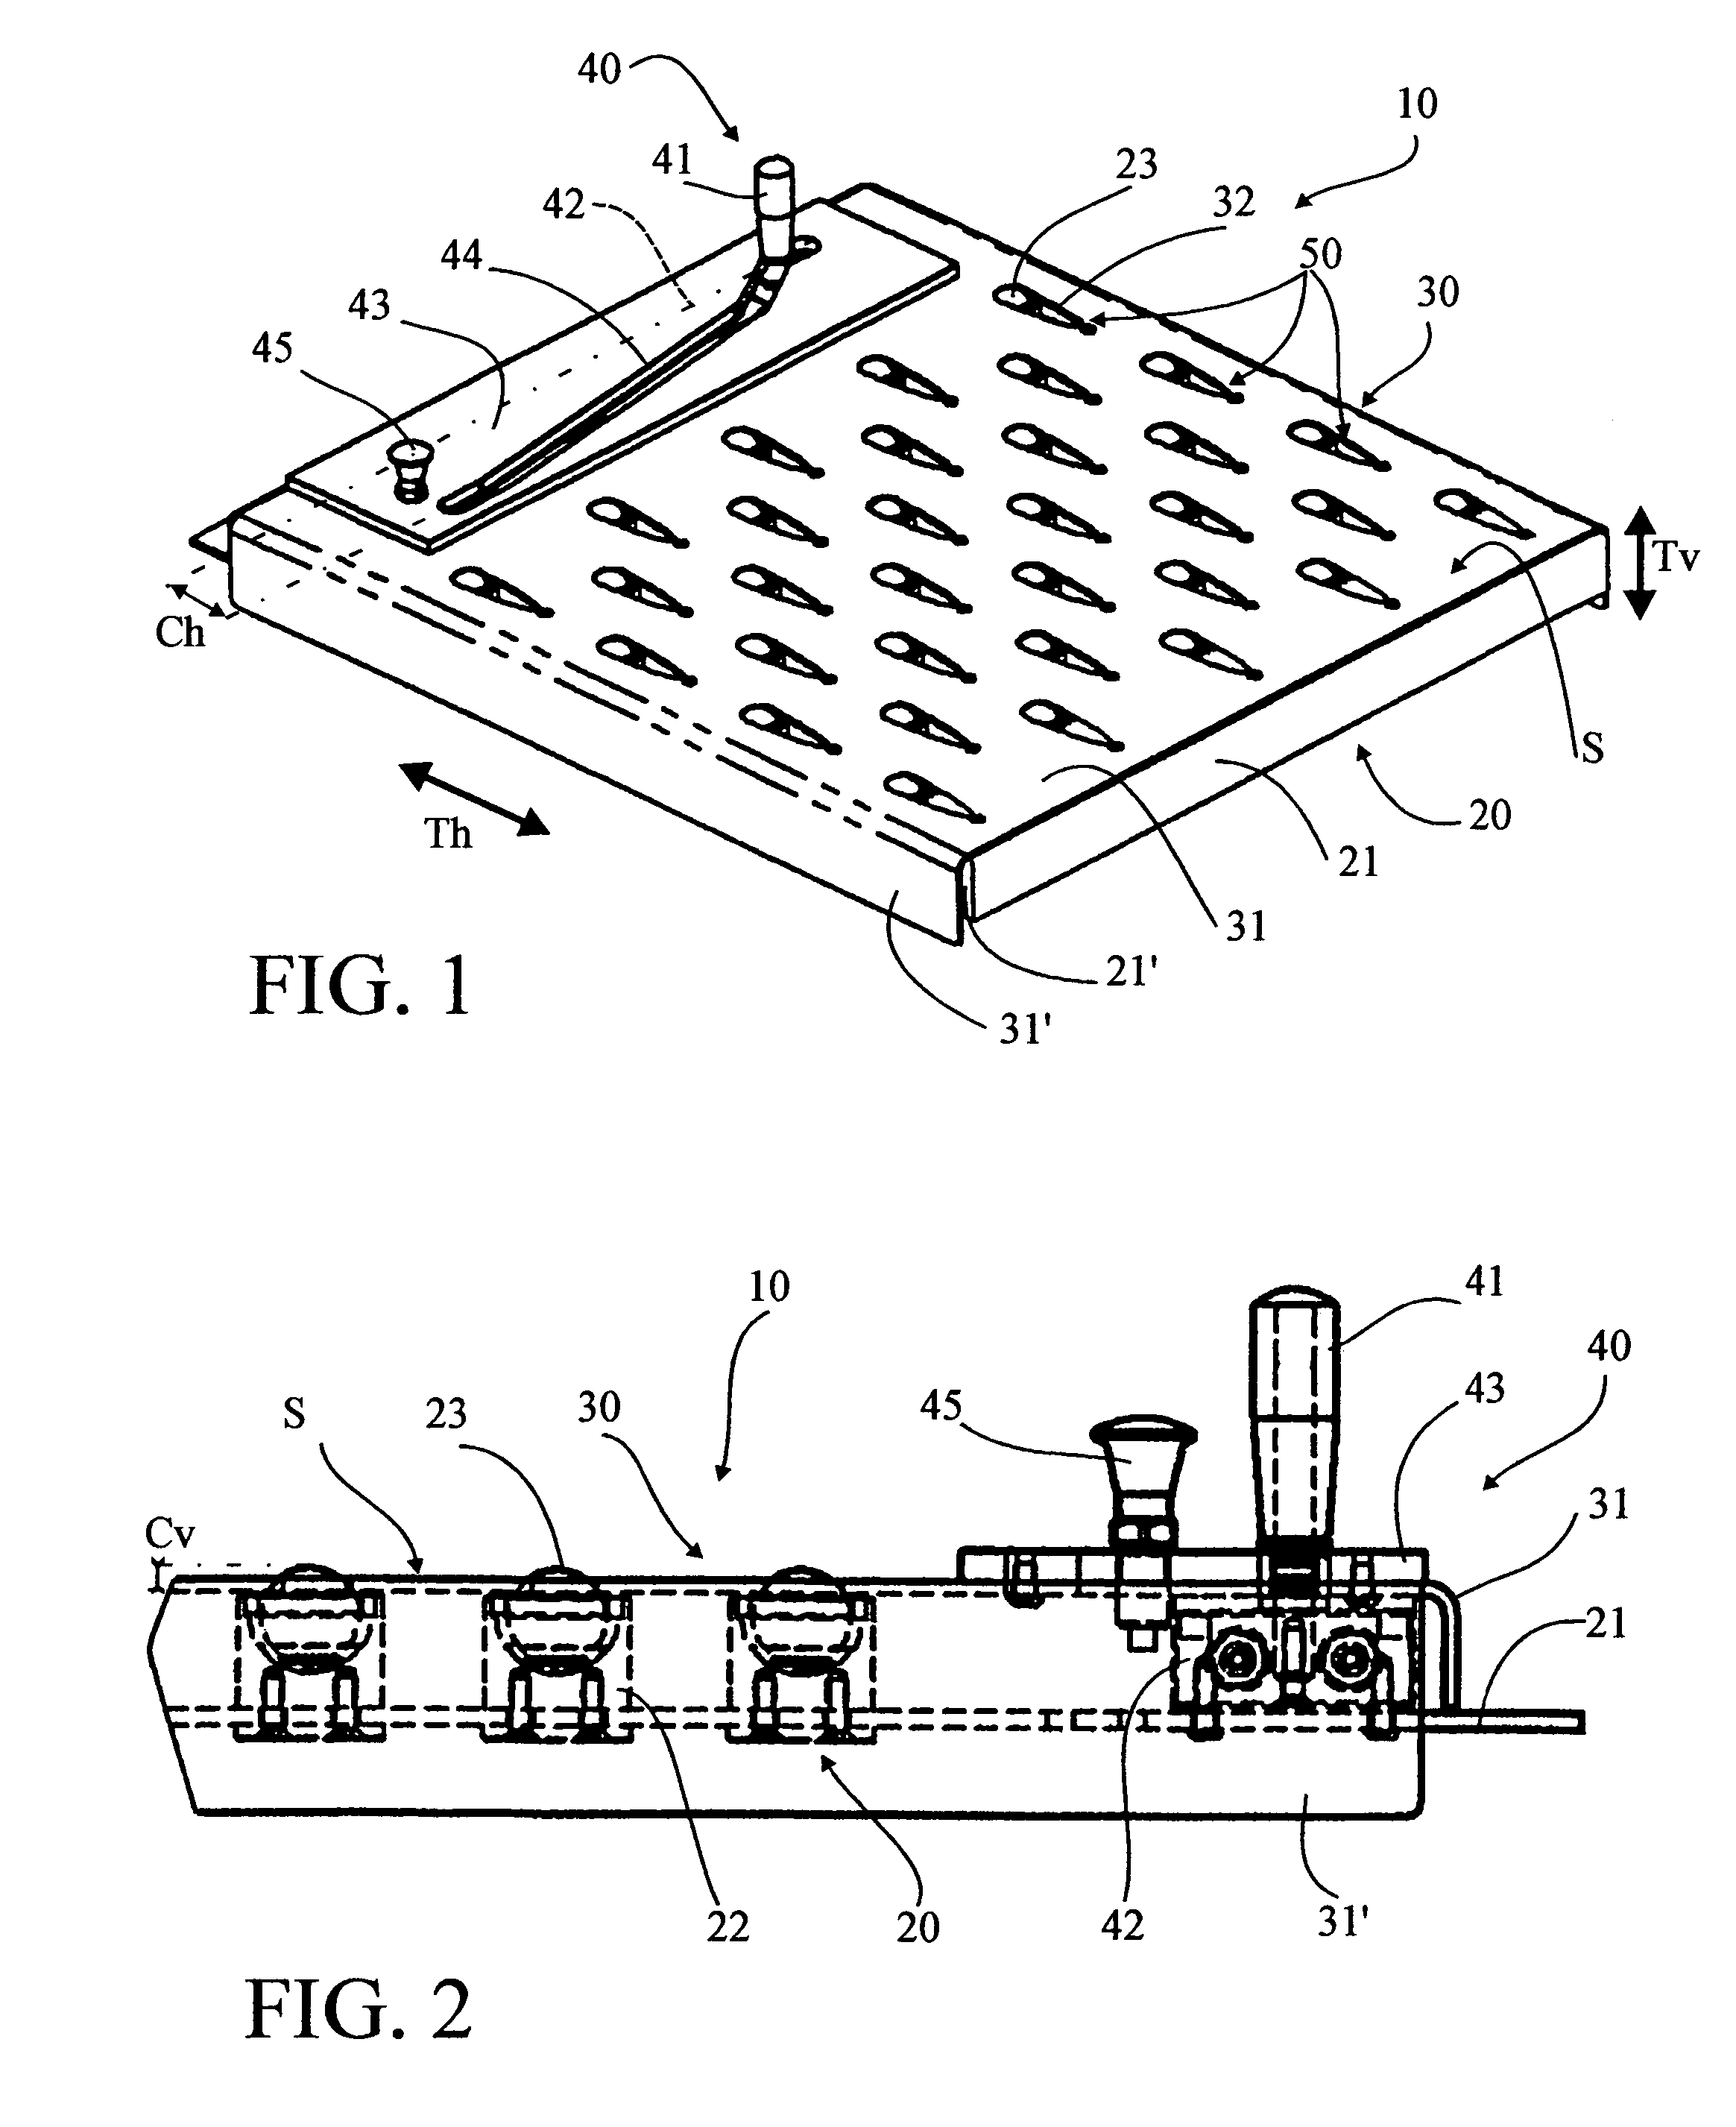 Load handling platform provided with retractable rollers